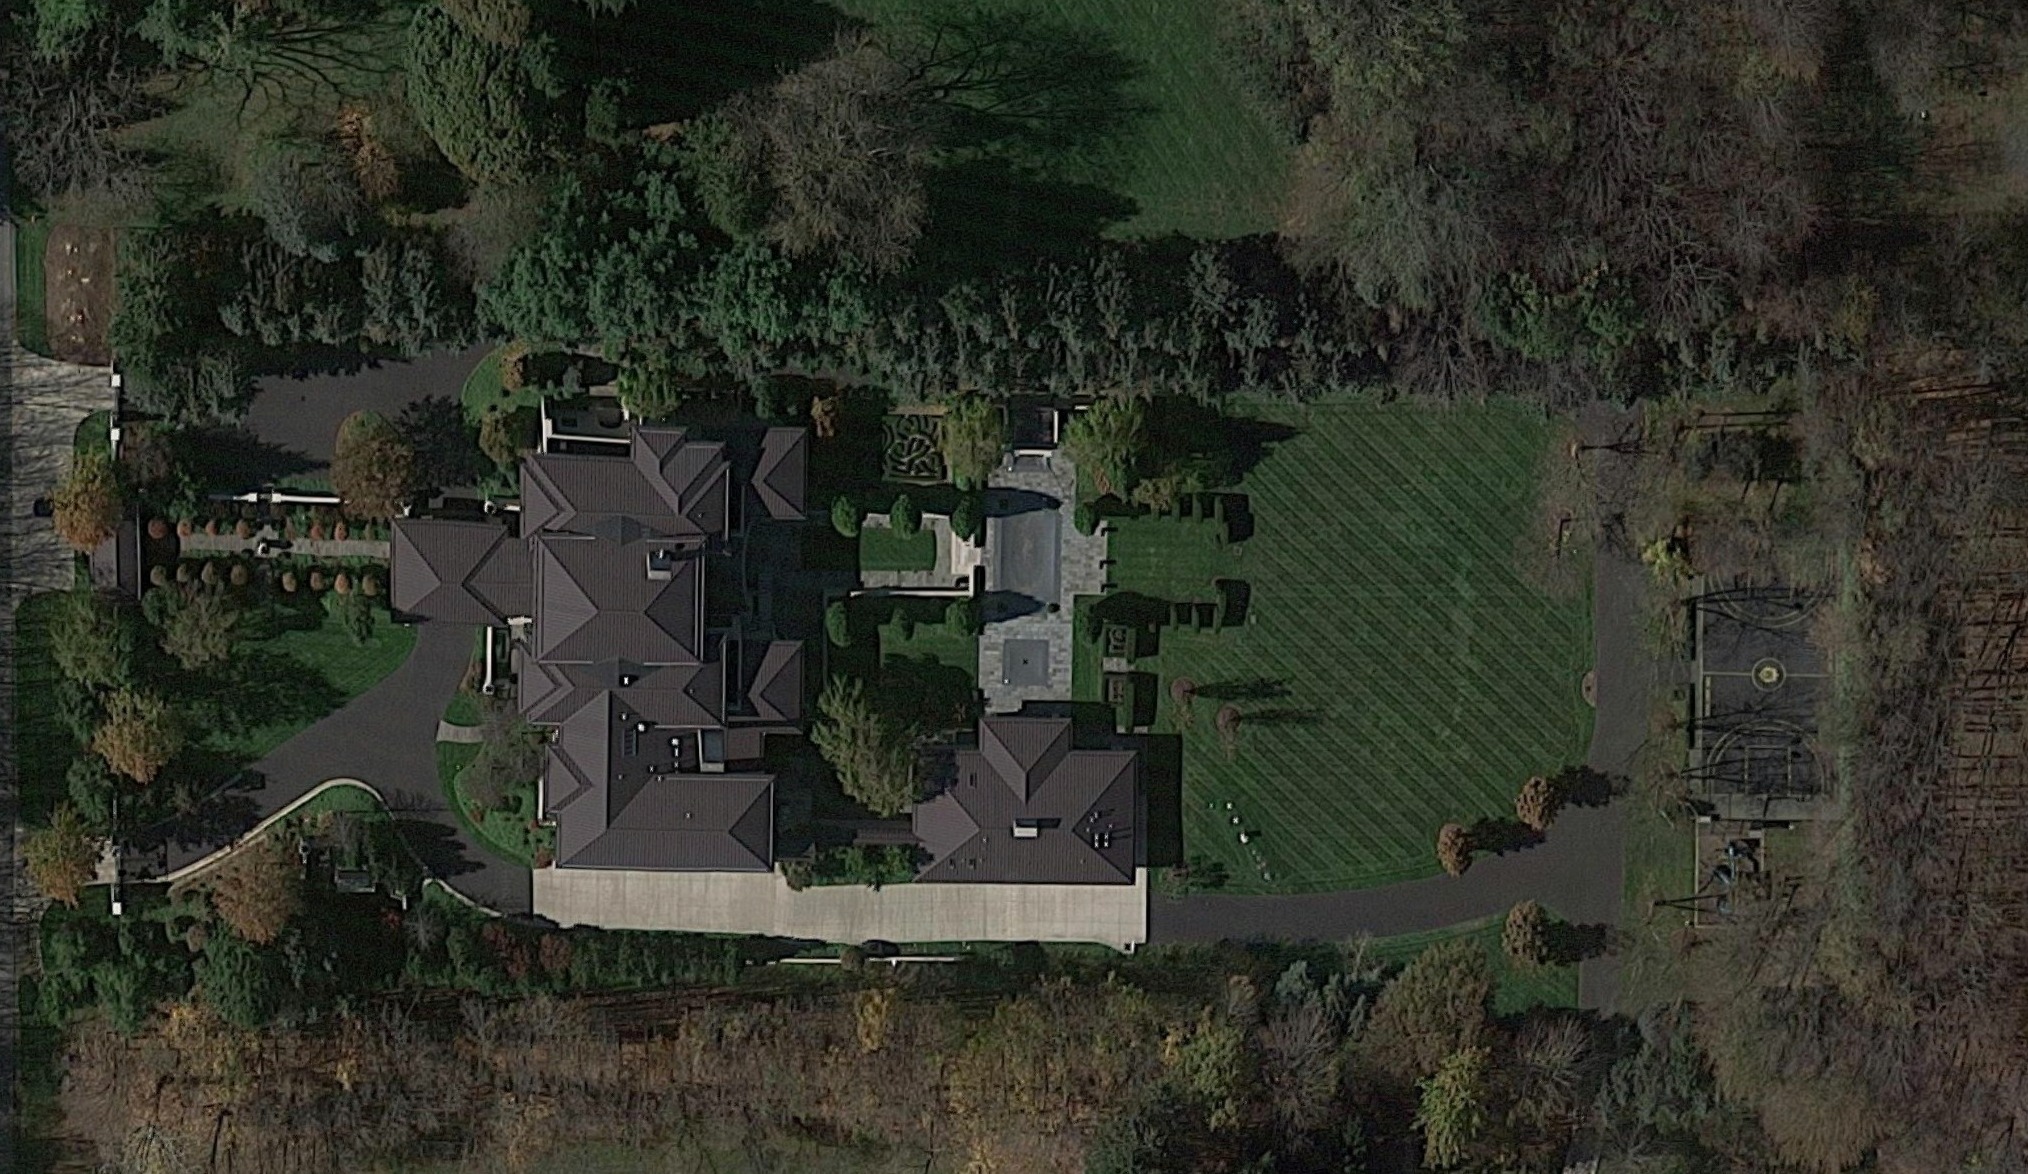 LeBron owns a house in Ohio worth $9million